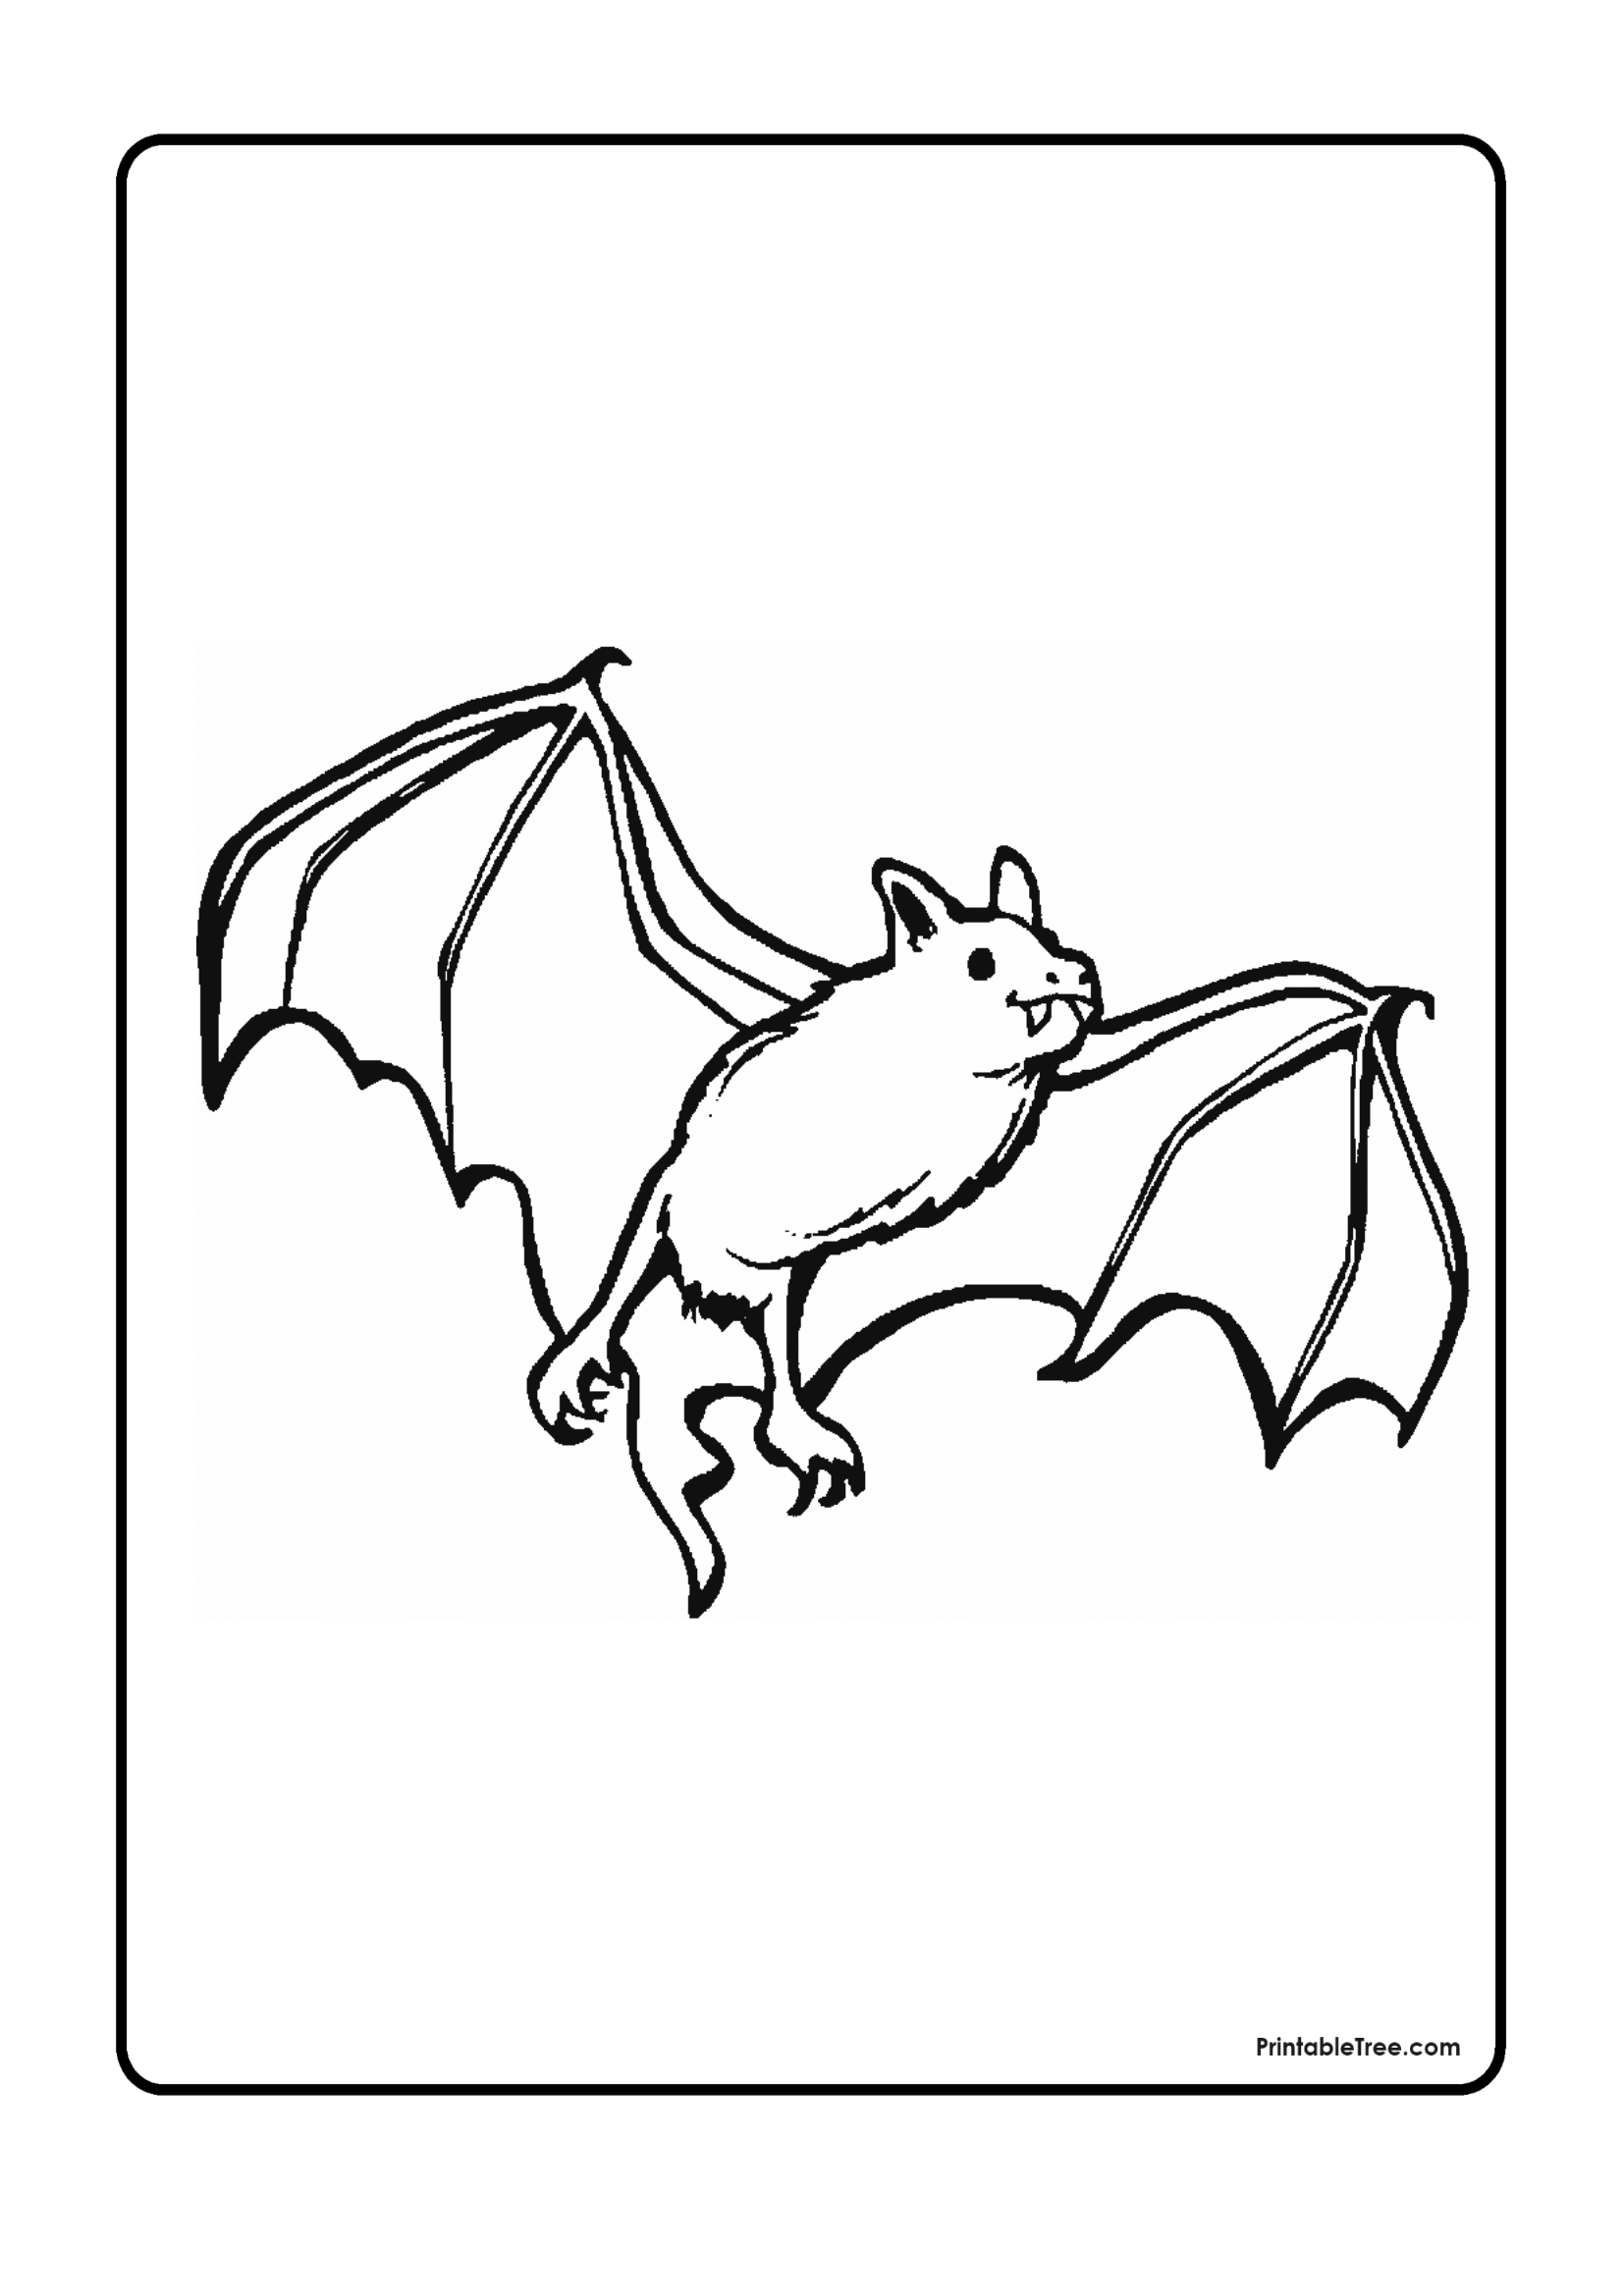 Free printable bat coloring pages pdf for kids and adults